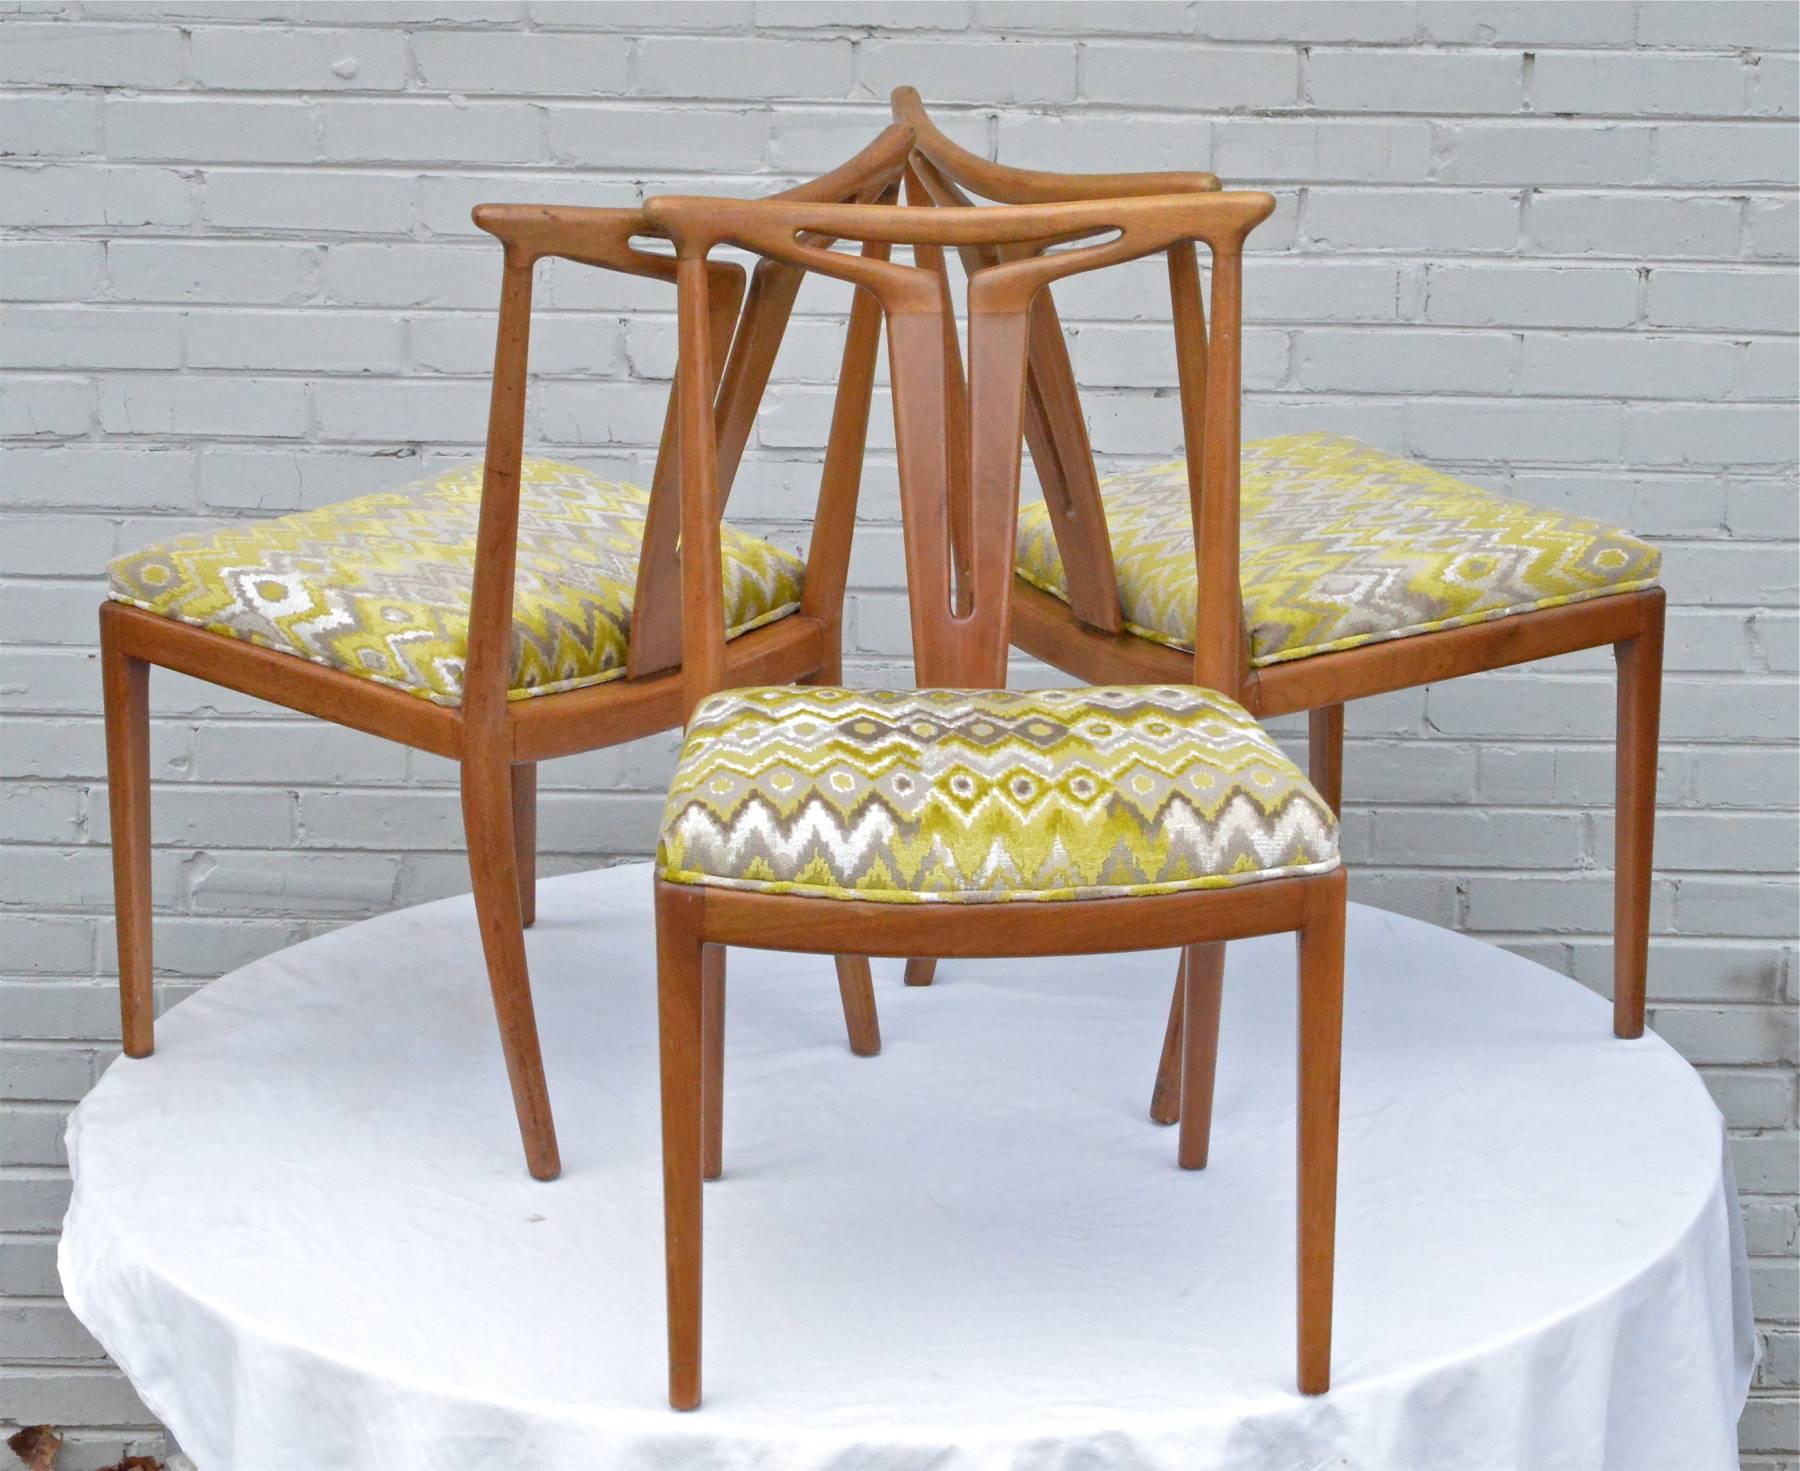 American Modern Chair Quad with T-Back Splats 5